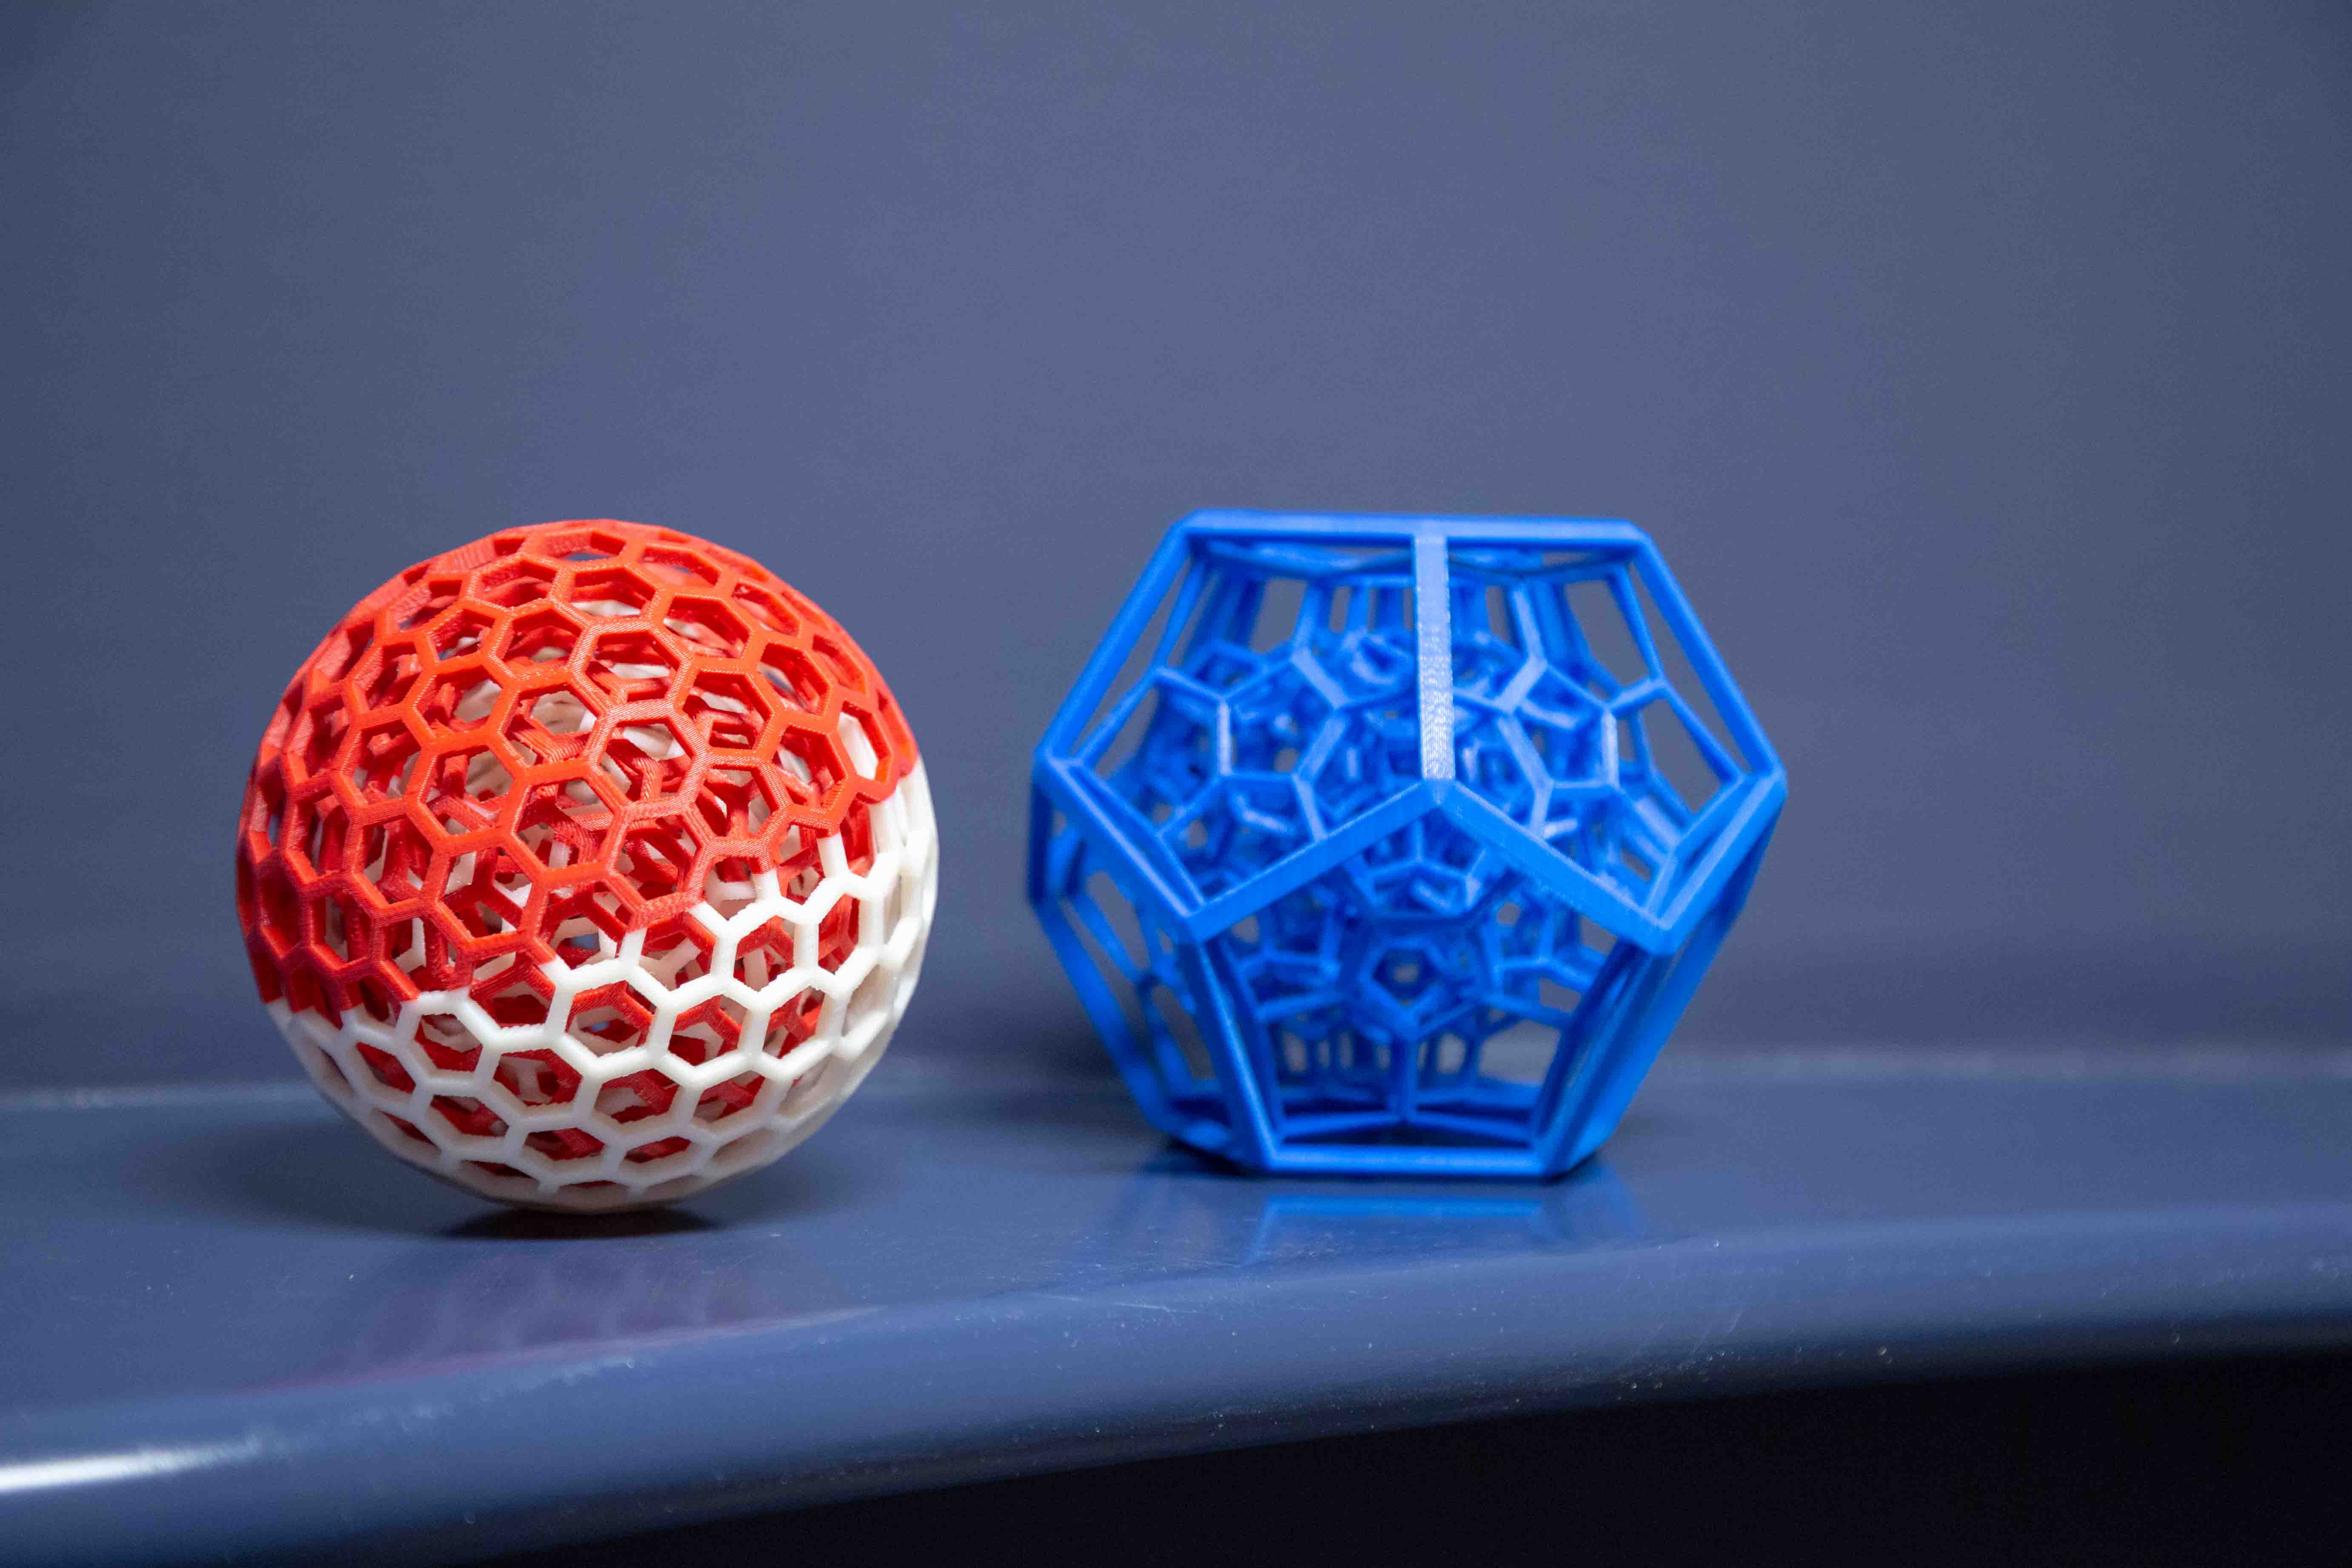 Additive manufacturing techniques are capable of producing complex, organic designs.